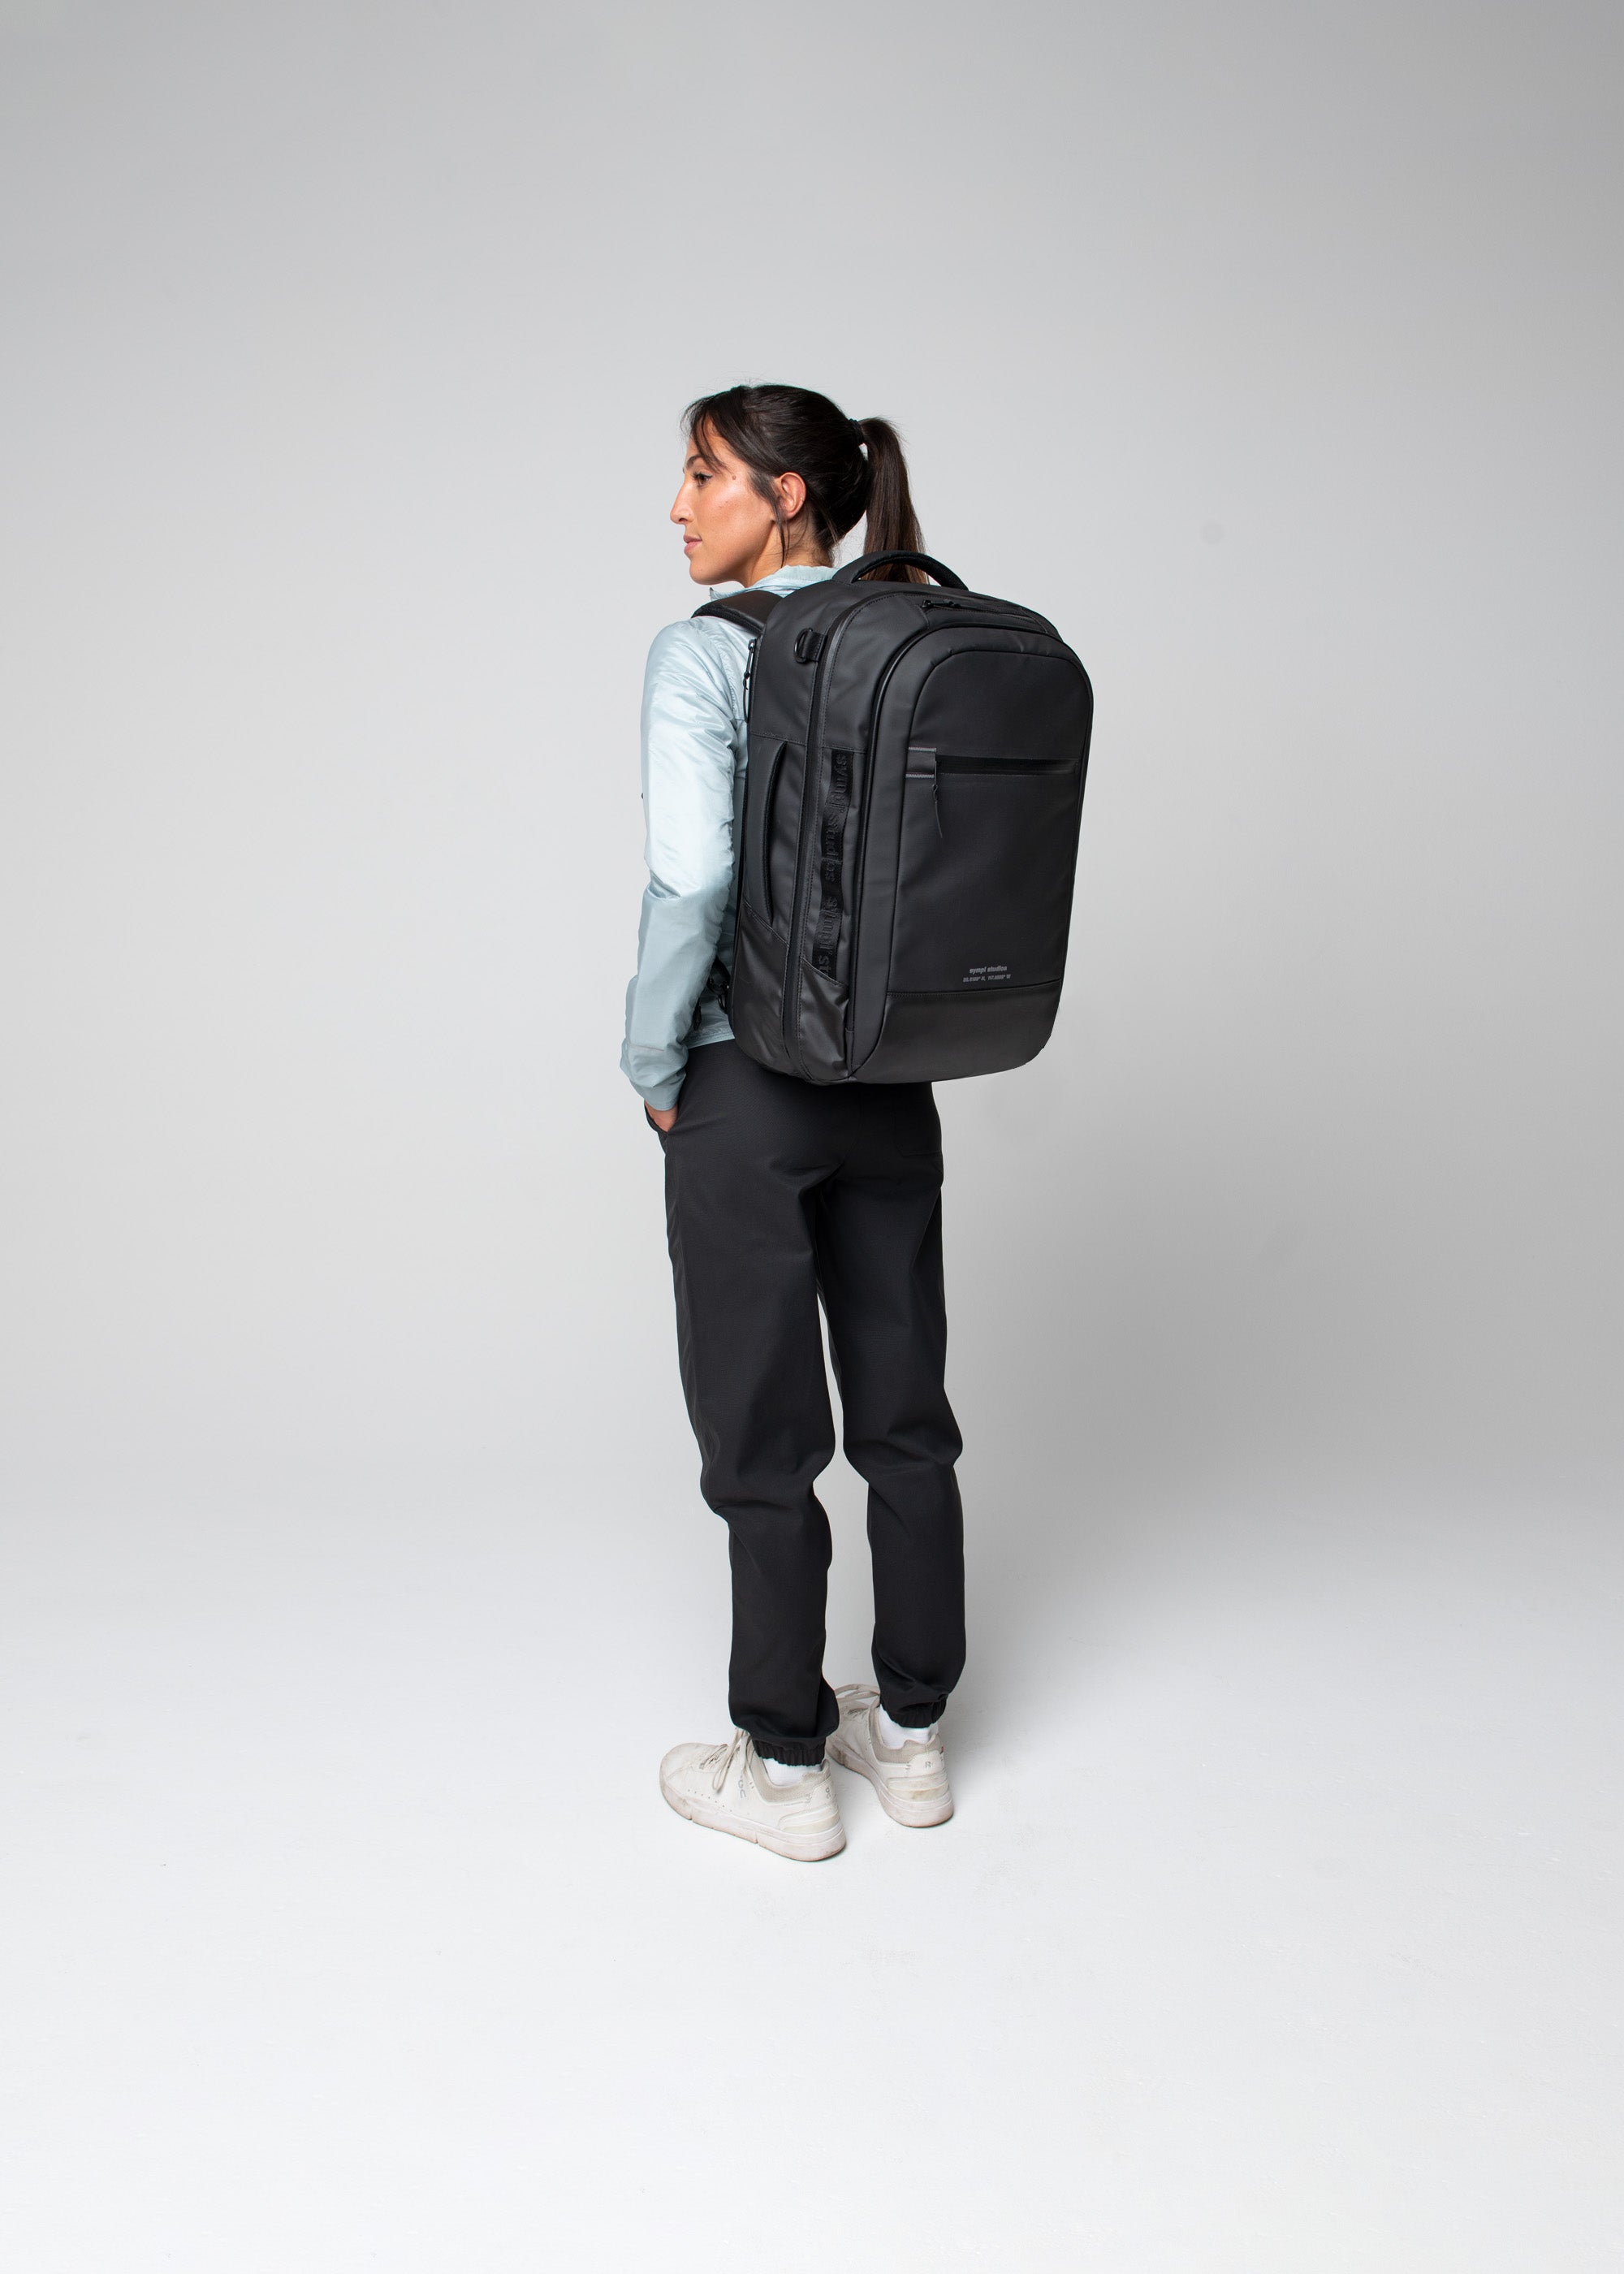 Sympl Travel Backpack | Sustainable, Durable, Spacious Backpack